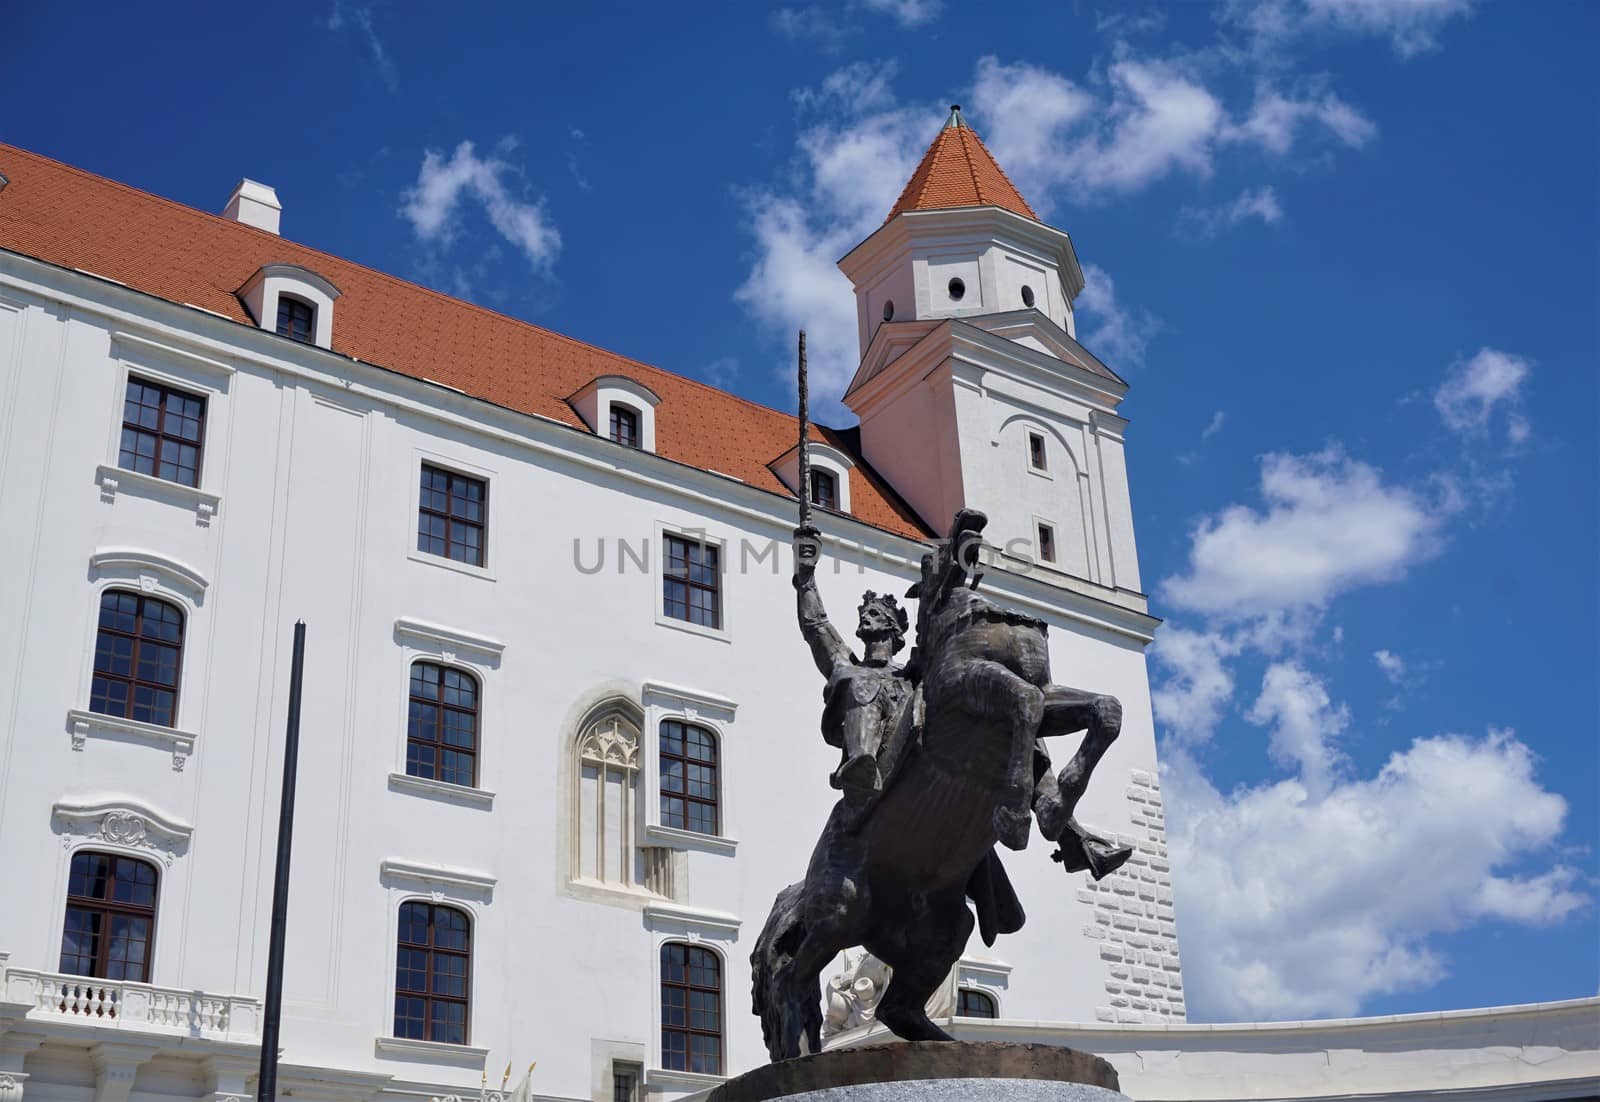 Bratislava castle and statue in front of blue sky in summer